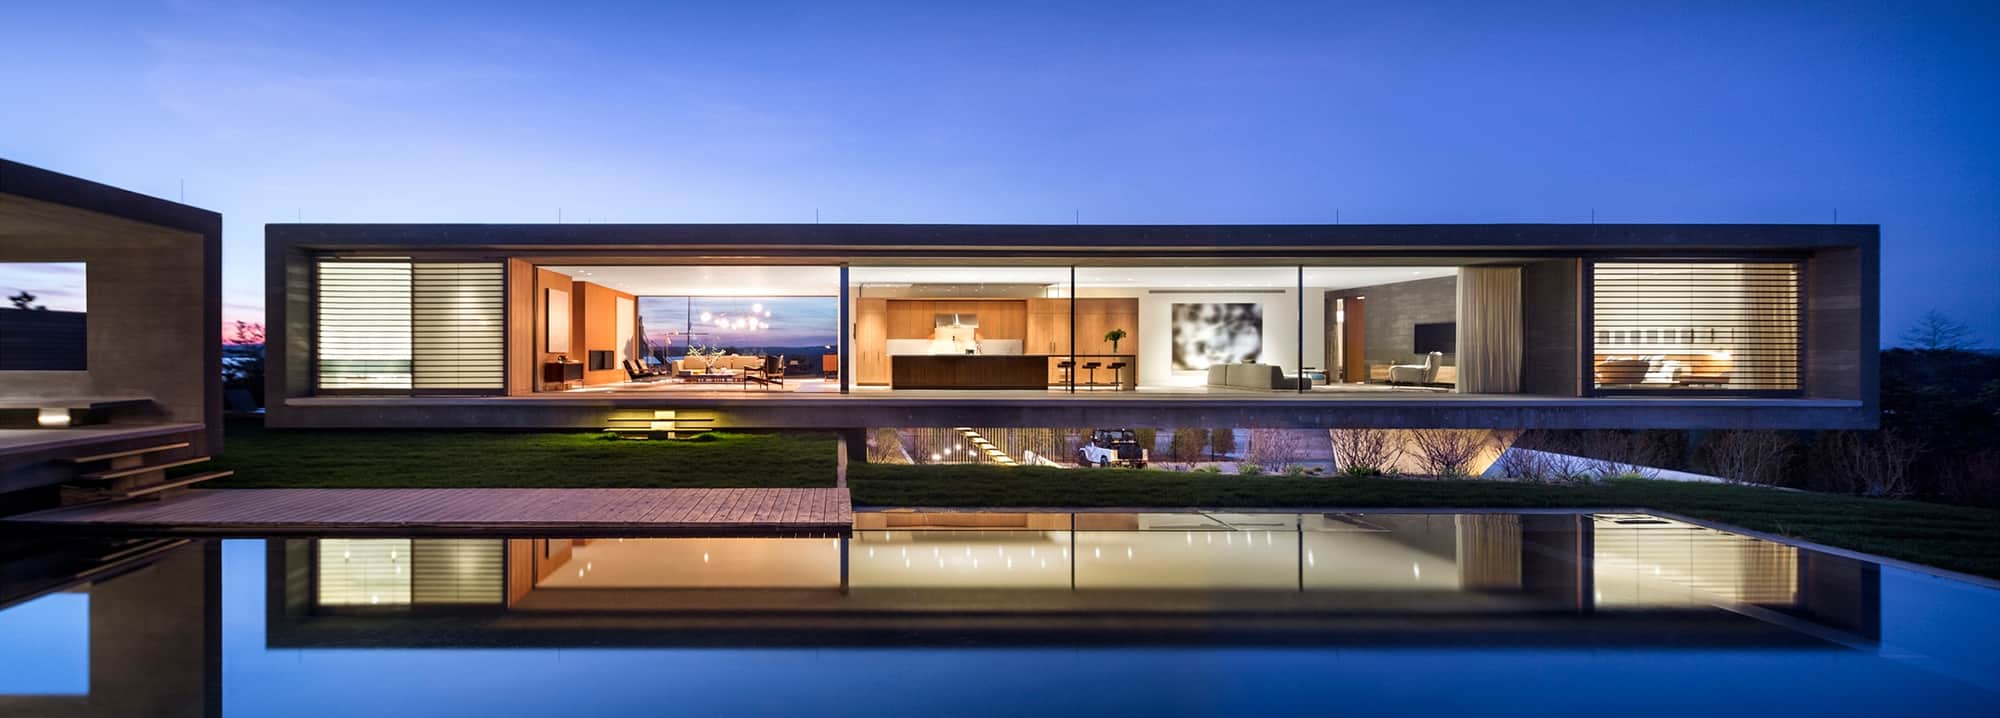 the light from inside a contemporary home reflects off the infinity pool outside